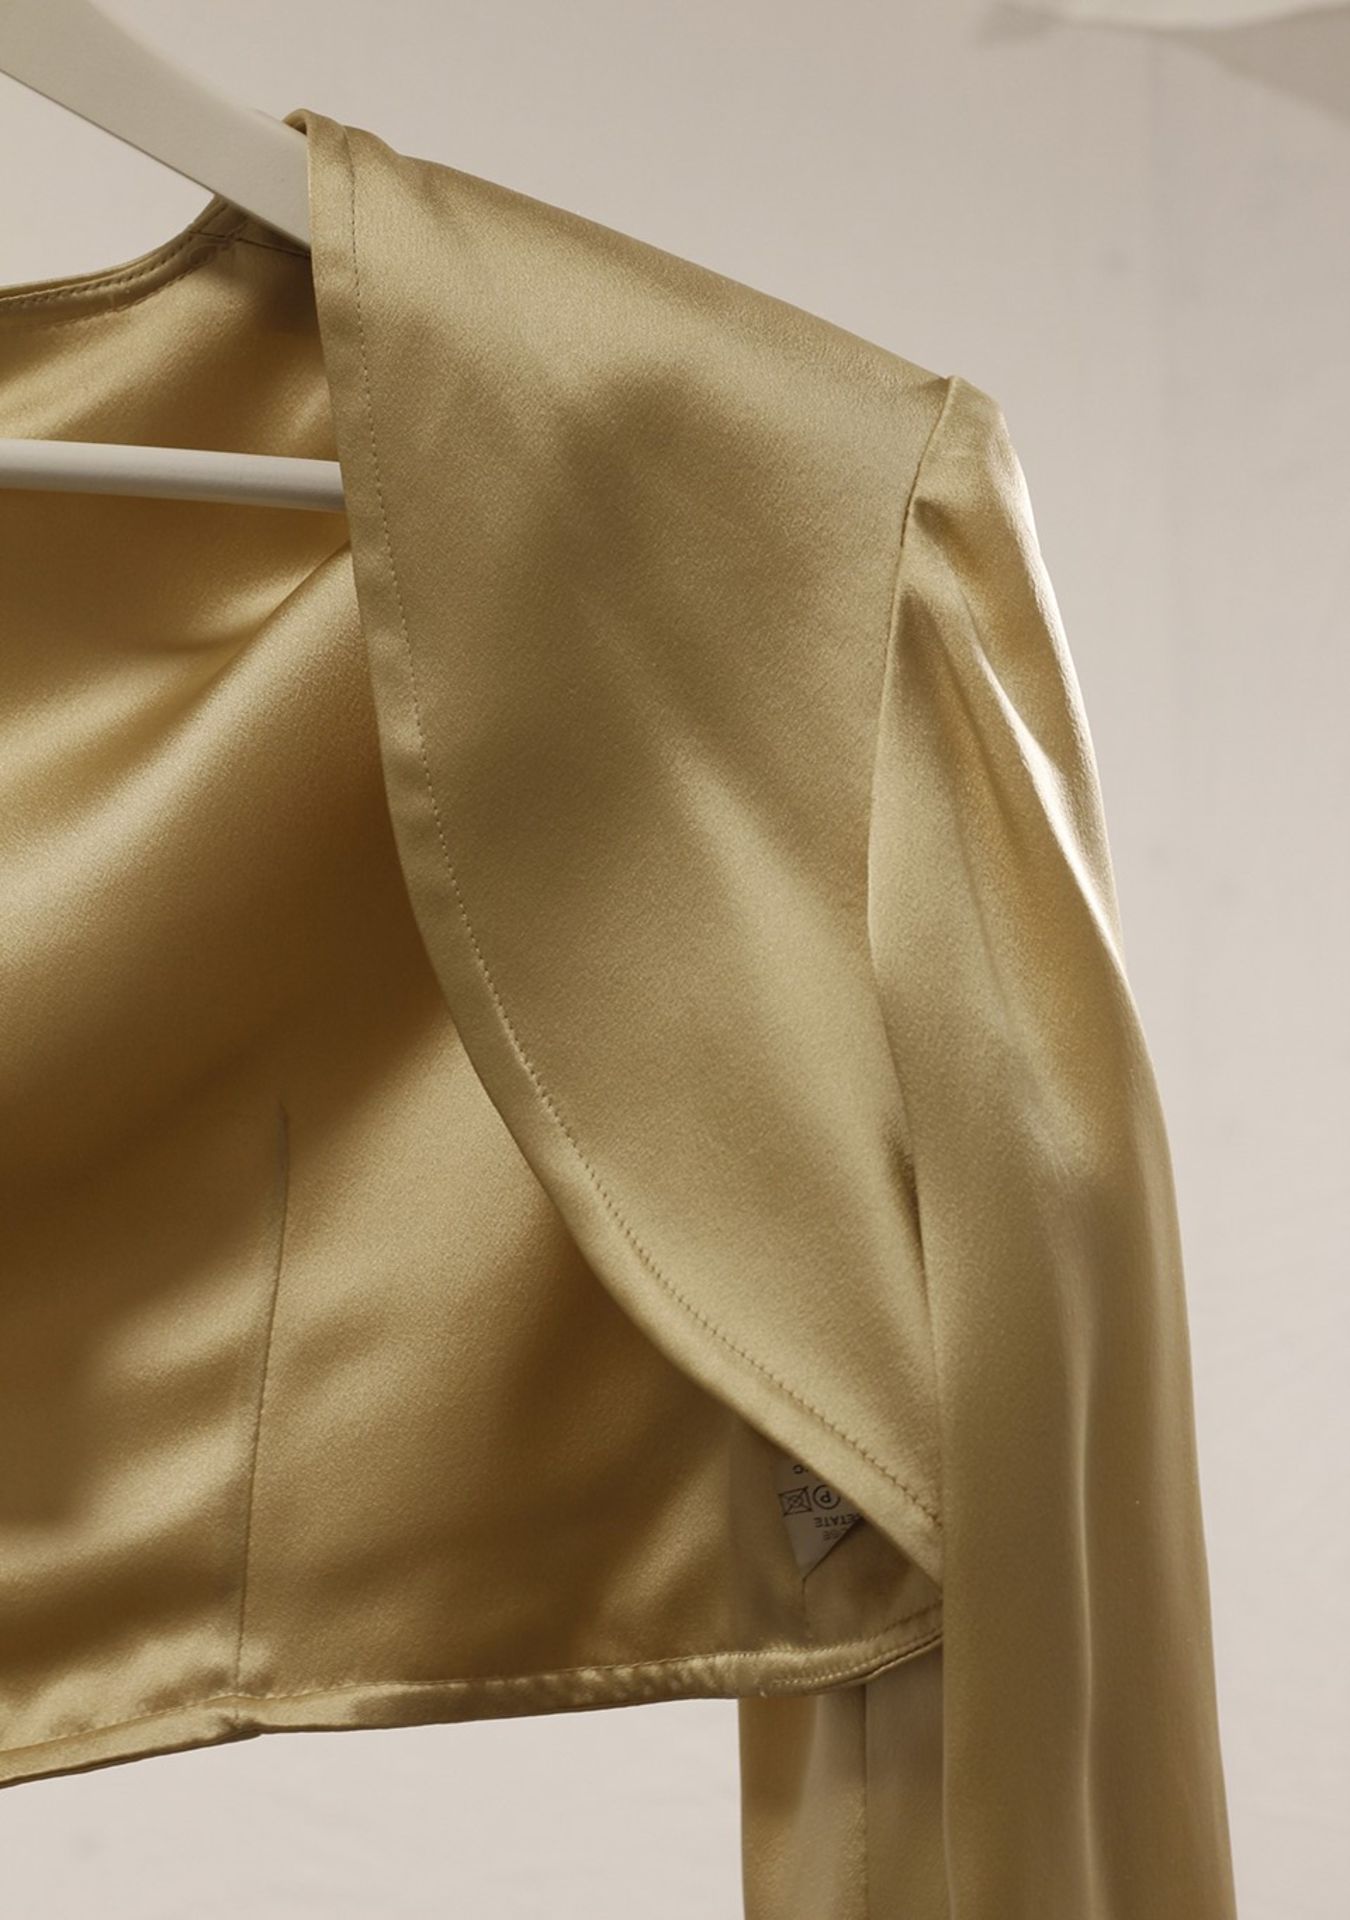 1 x Anne Belin Champagne Bolero - Size: 16 - Material: 50% Viscose, 50% Acetate - From a High End - Image 4 of 6